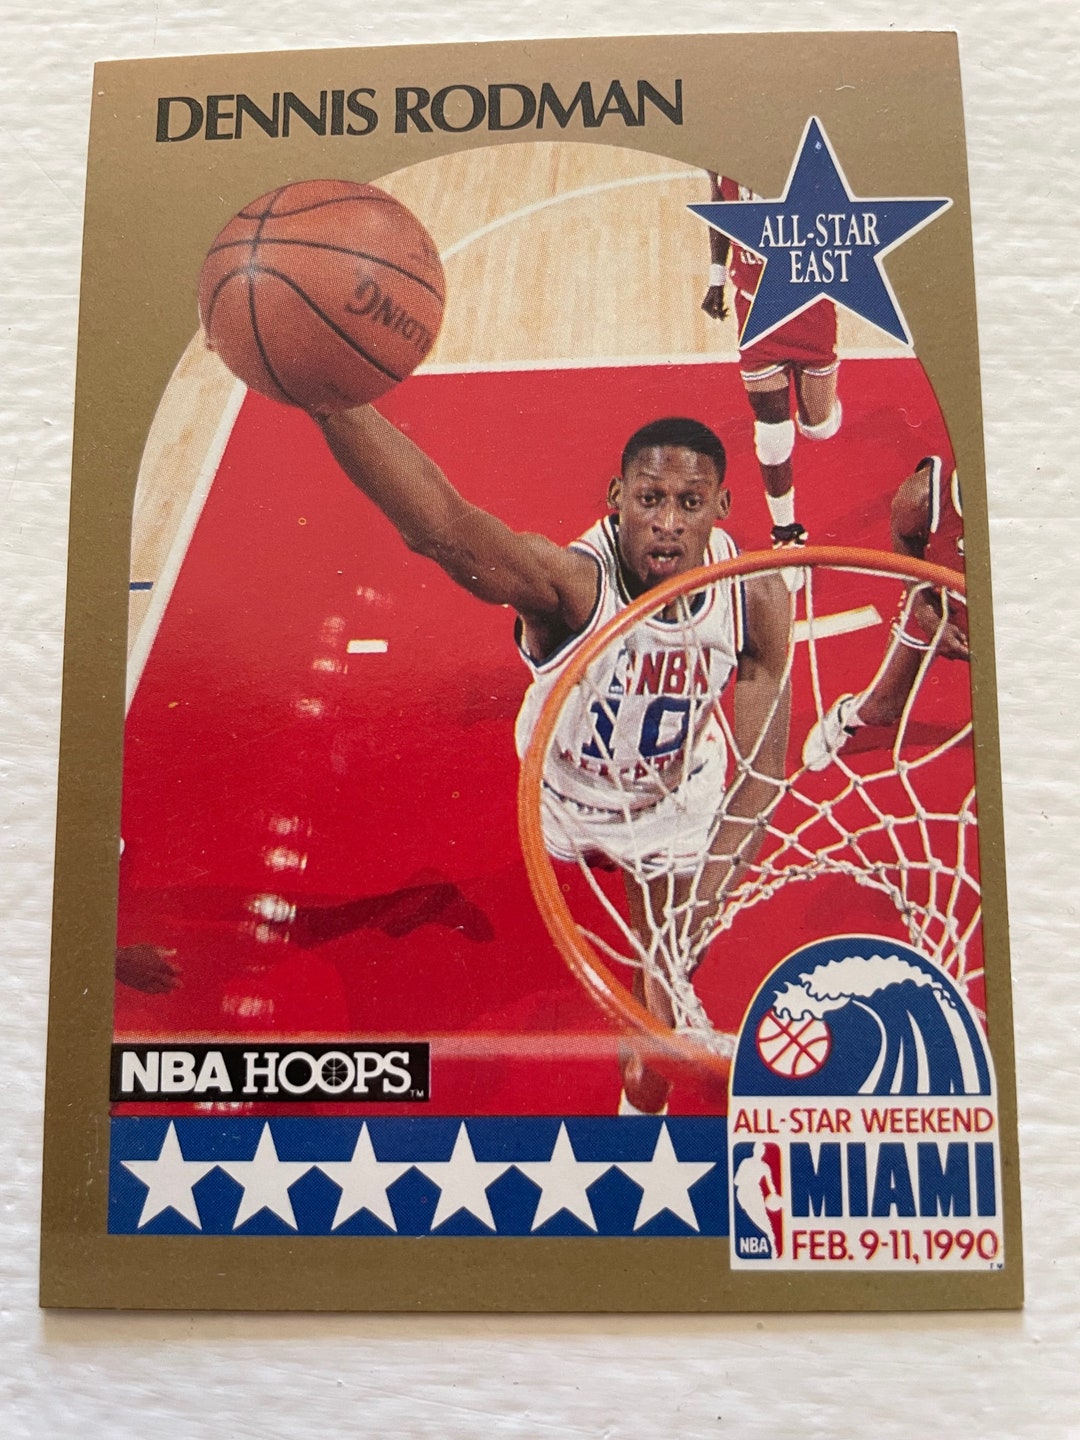 Dennis Rodman 1990 NBA Hoops Card 109. Defensive Player Of The Year.